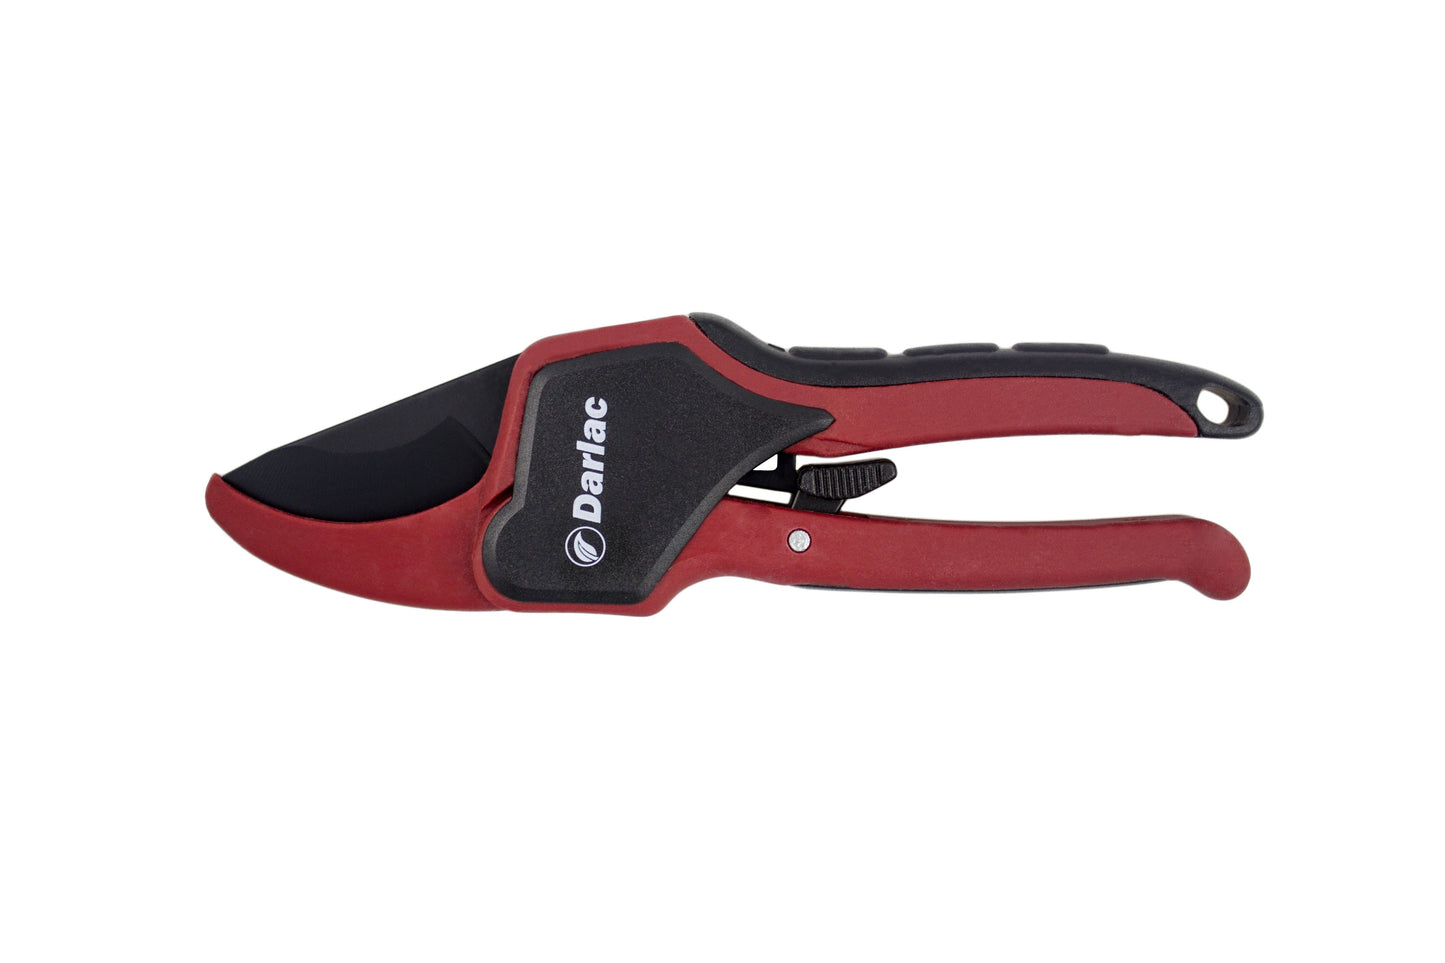 Darlac DP444 Classic Ratchet Pruner UK SHIPPING ONLY